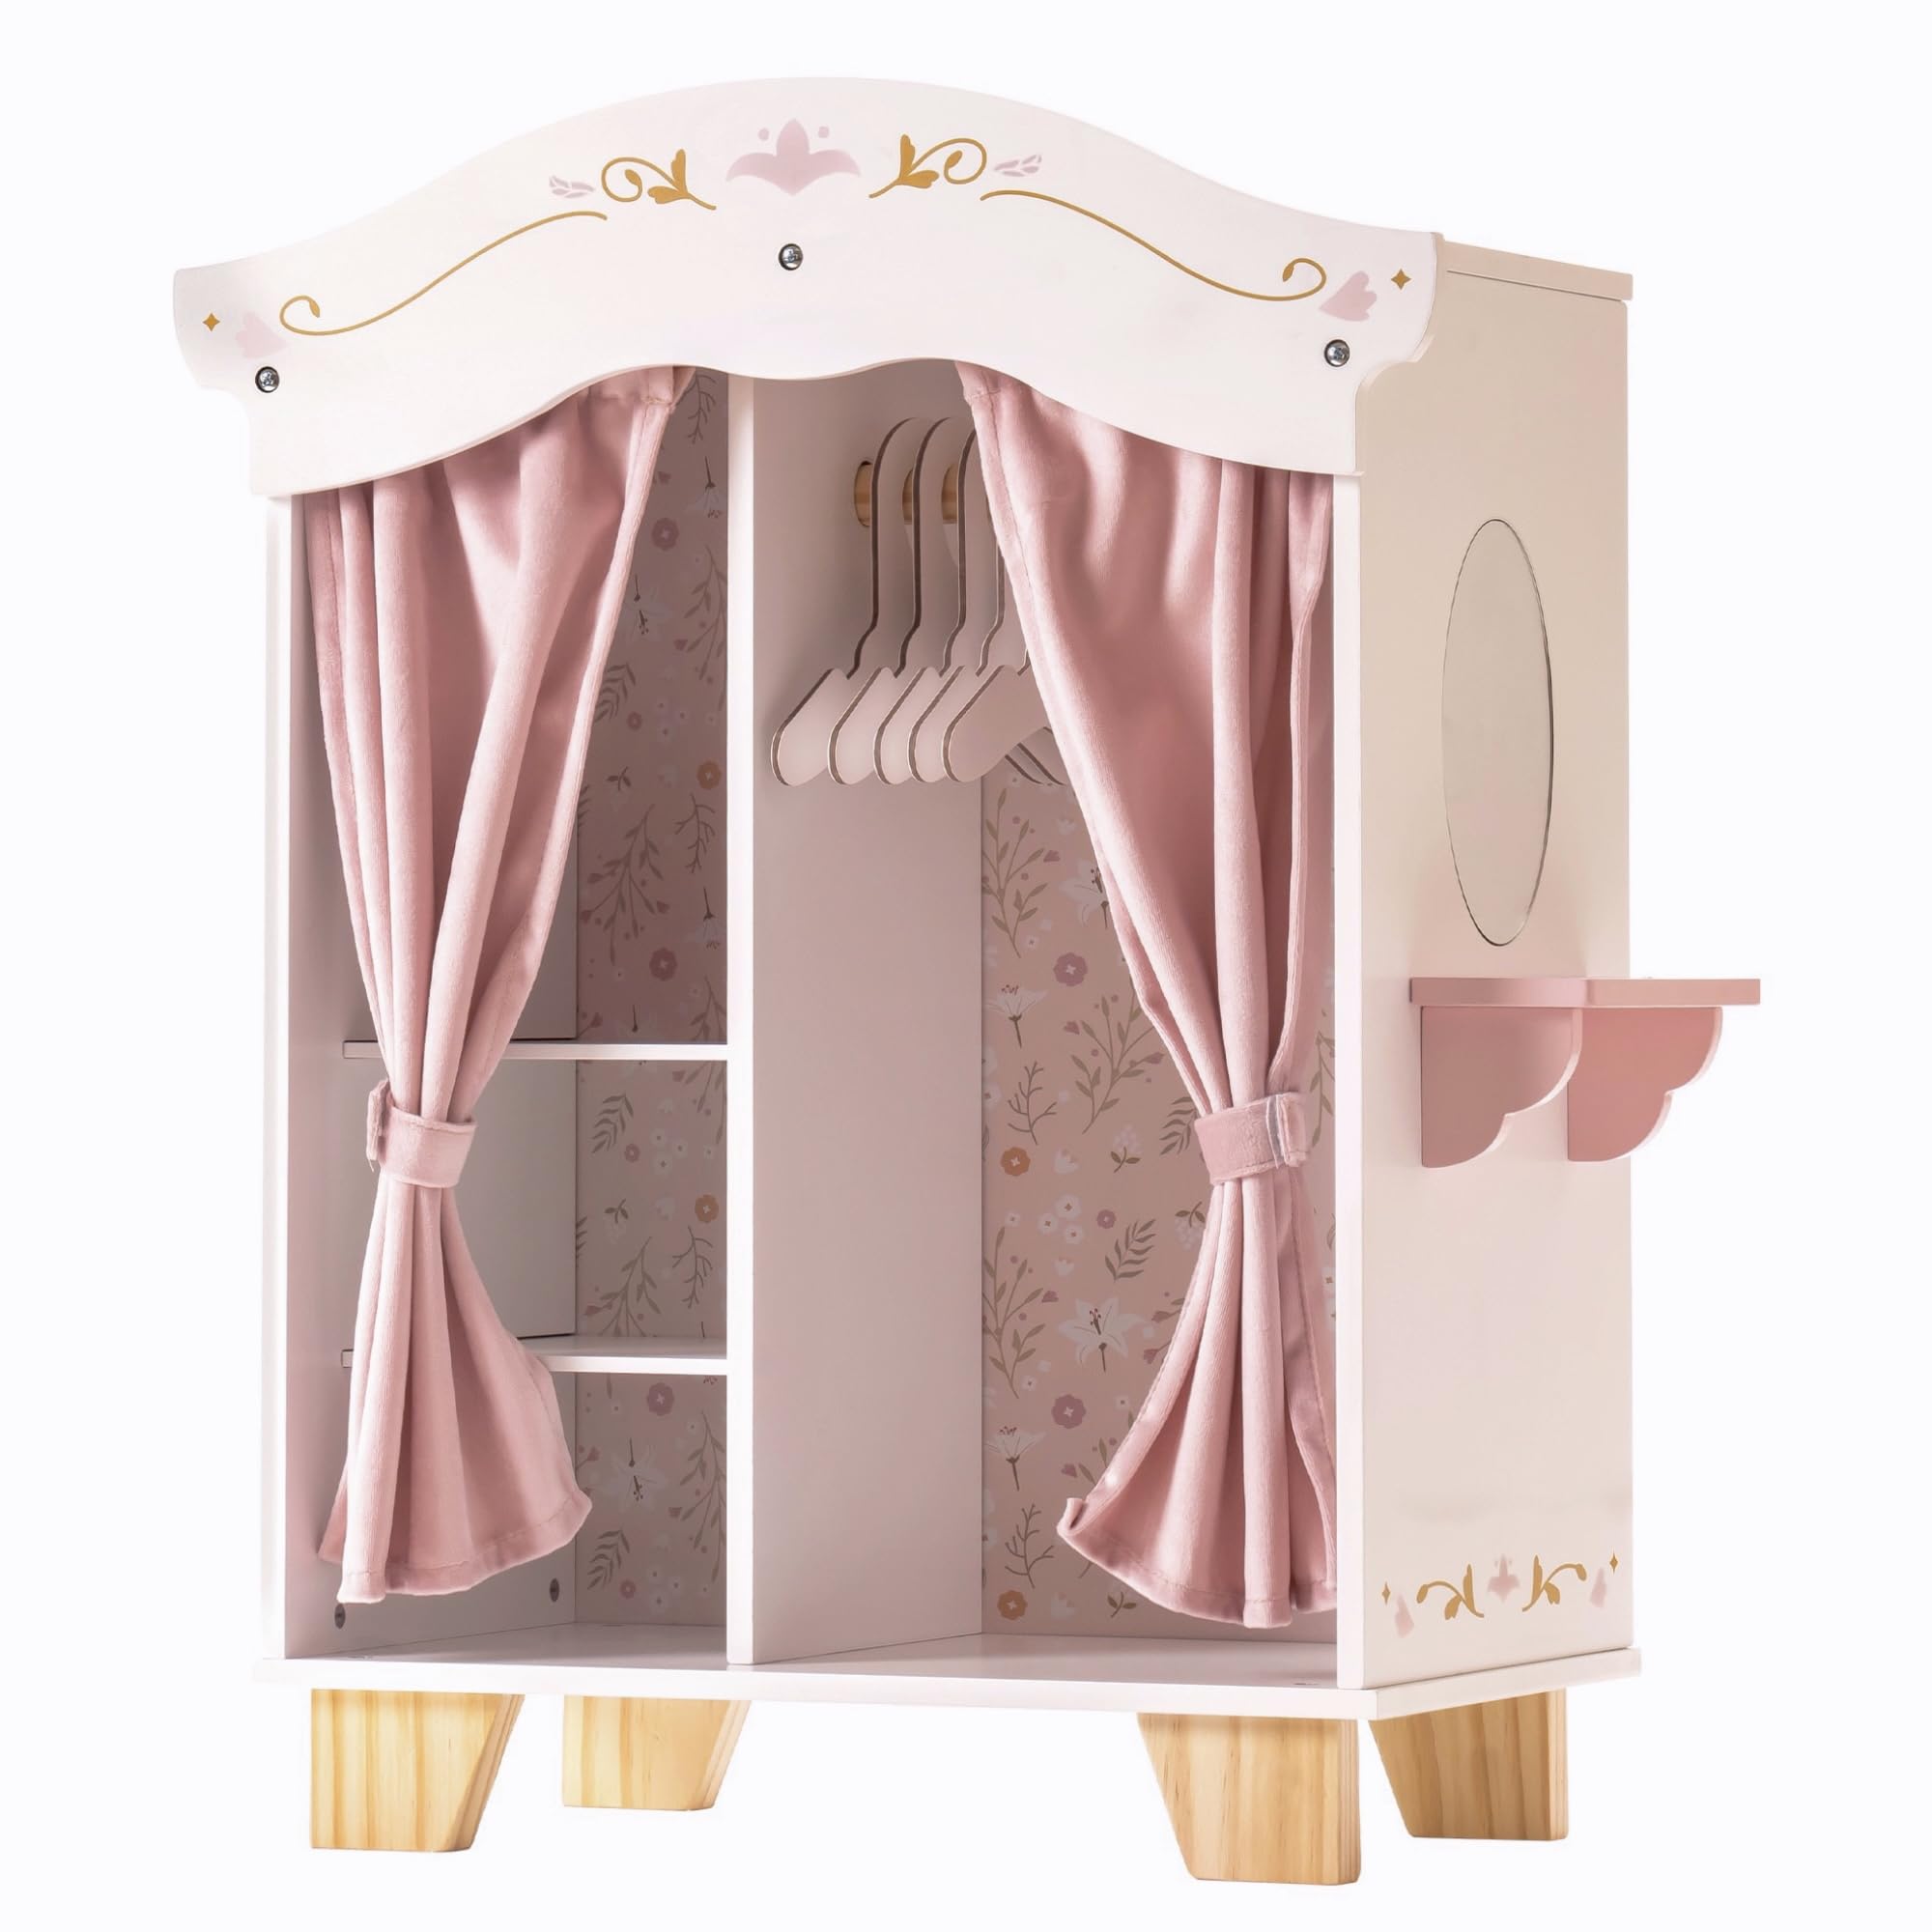 ROBUD Wooden Doll Furniture, Doll Closet with Mirror, 5 Hangers, Velvet Curtains, Elegance and Vintage Wooden Doll Accessories Toy Playsets, Fits for 16-20 inch Dolls, Gift for Boys & Girls